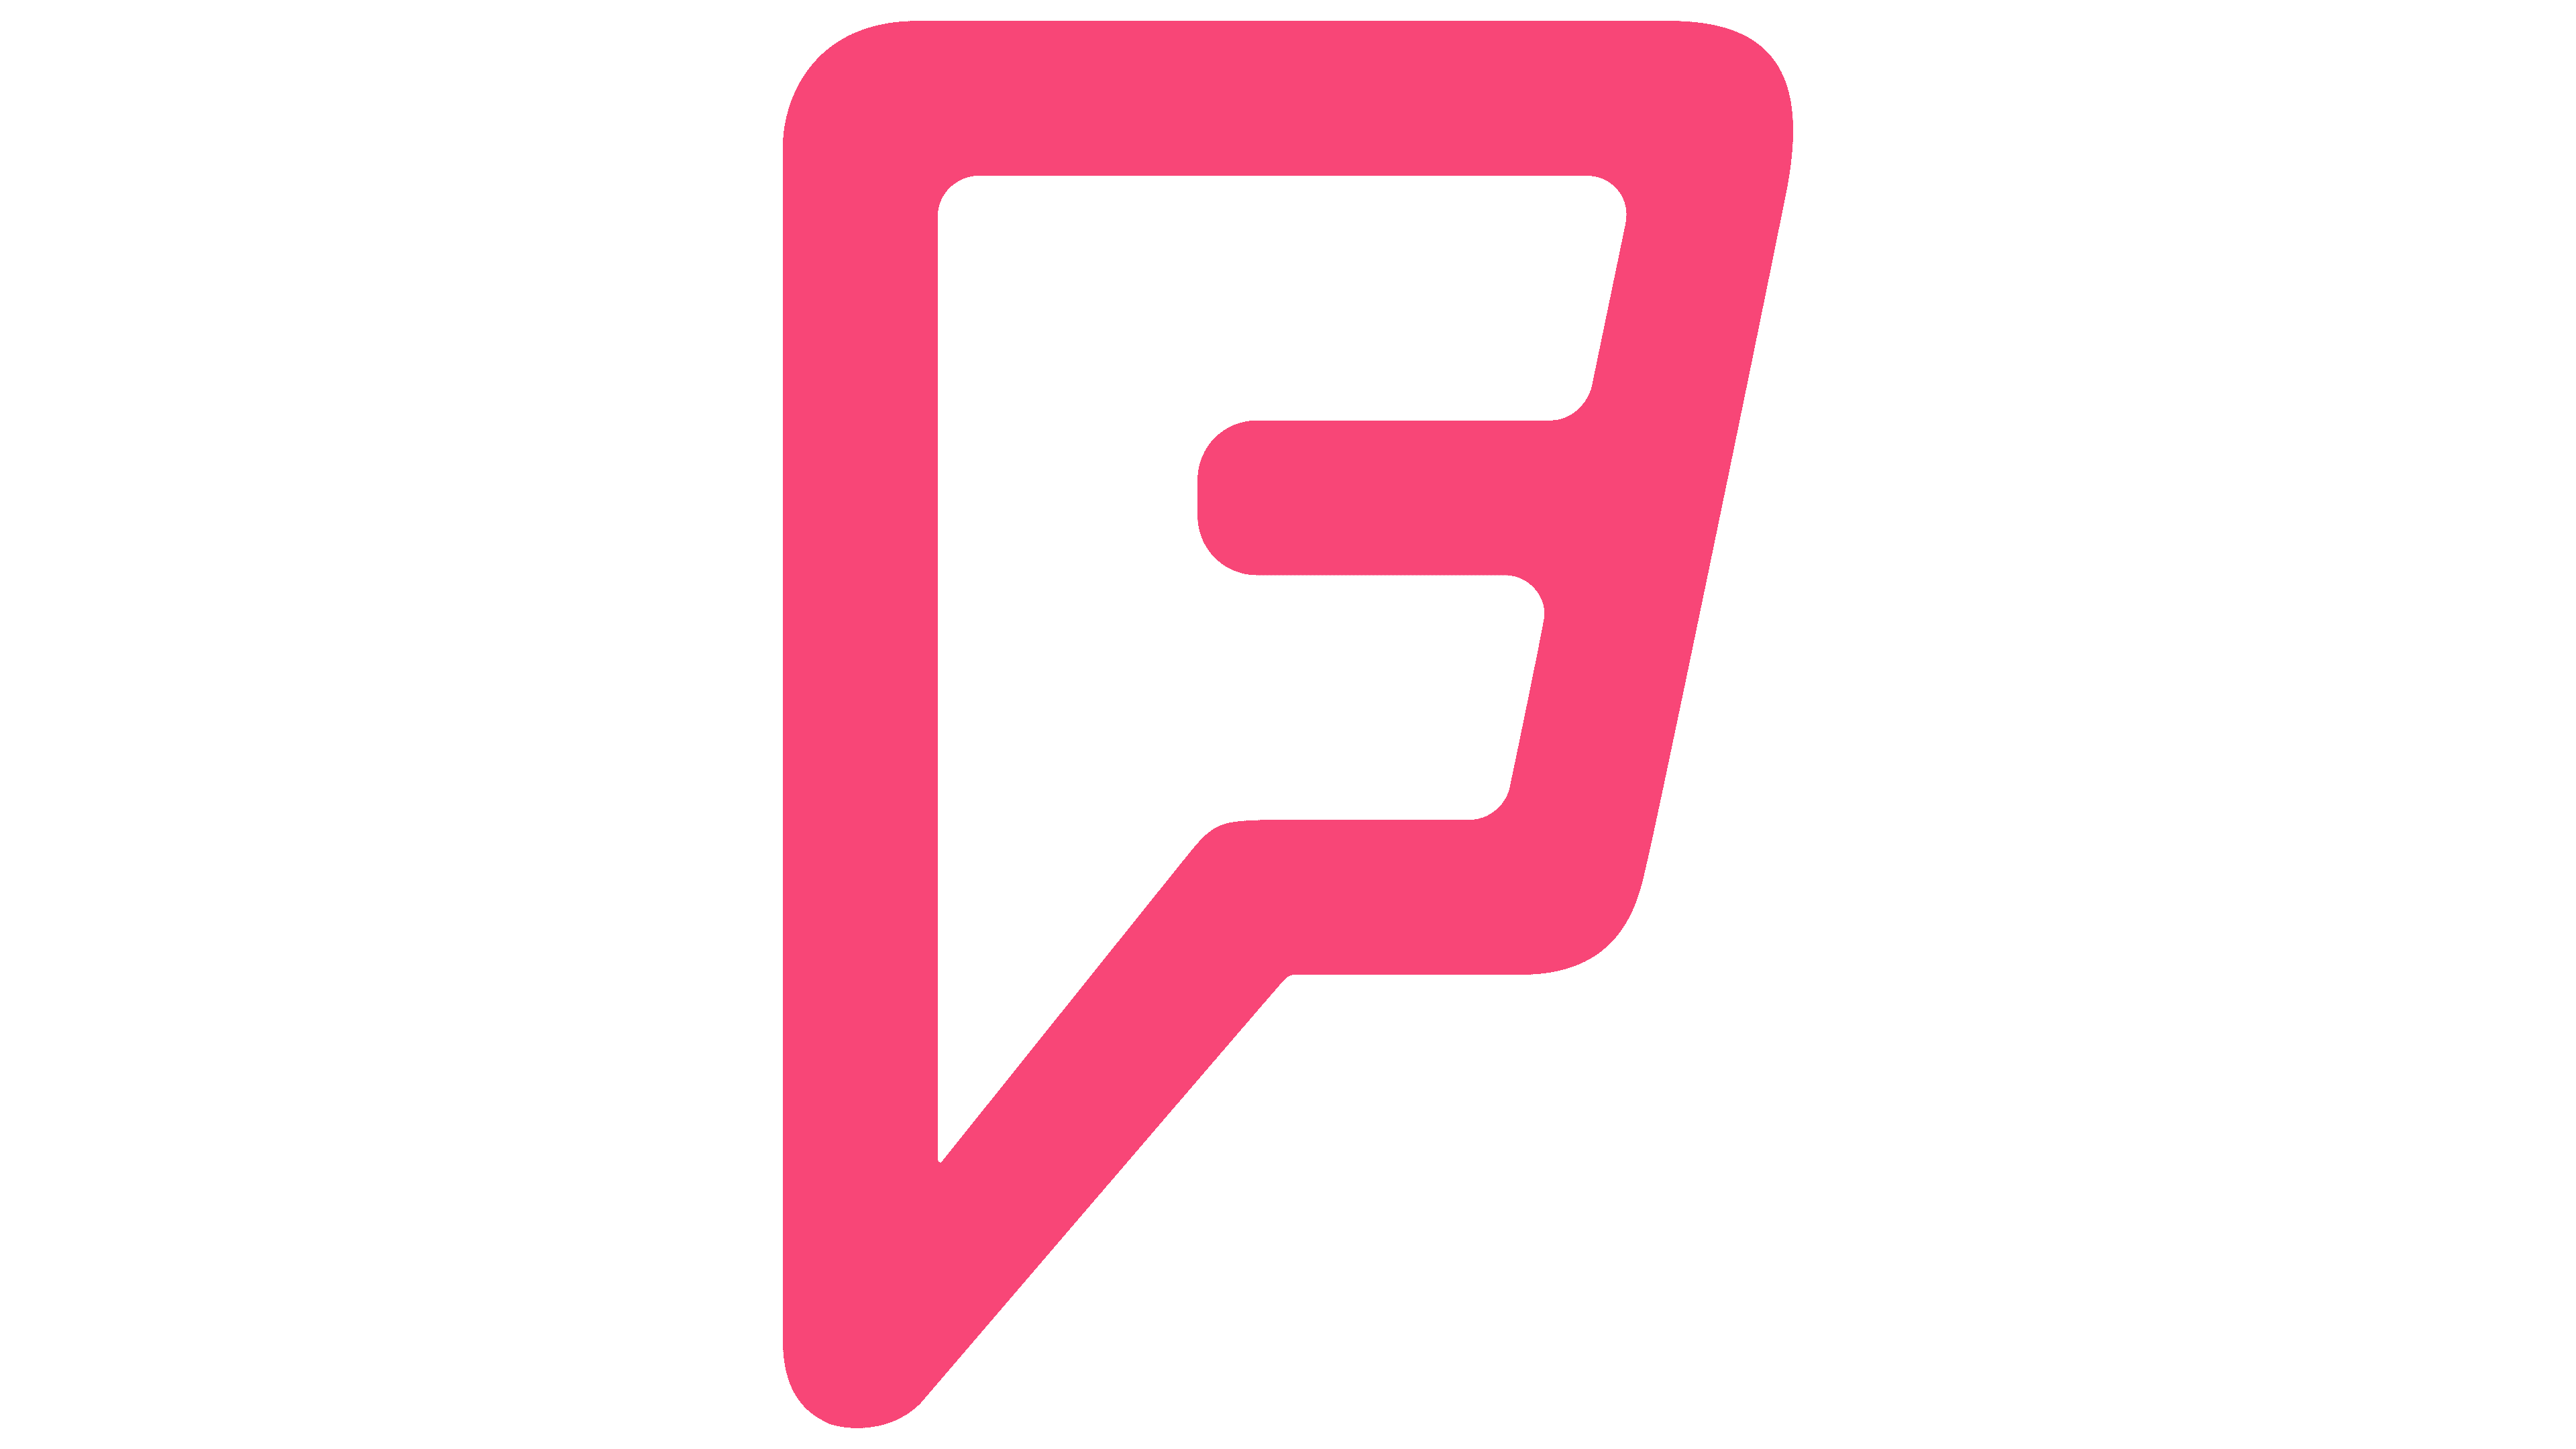 Foursquare Logo, meaning, history, PNG, SVG, vector